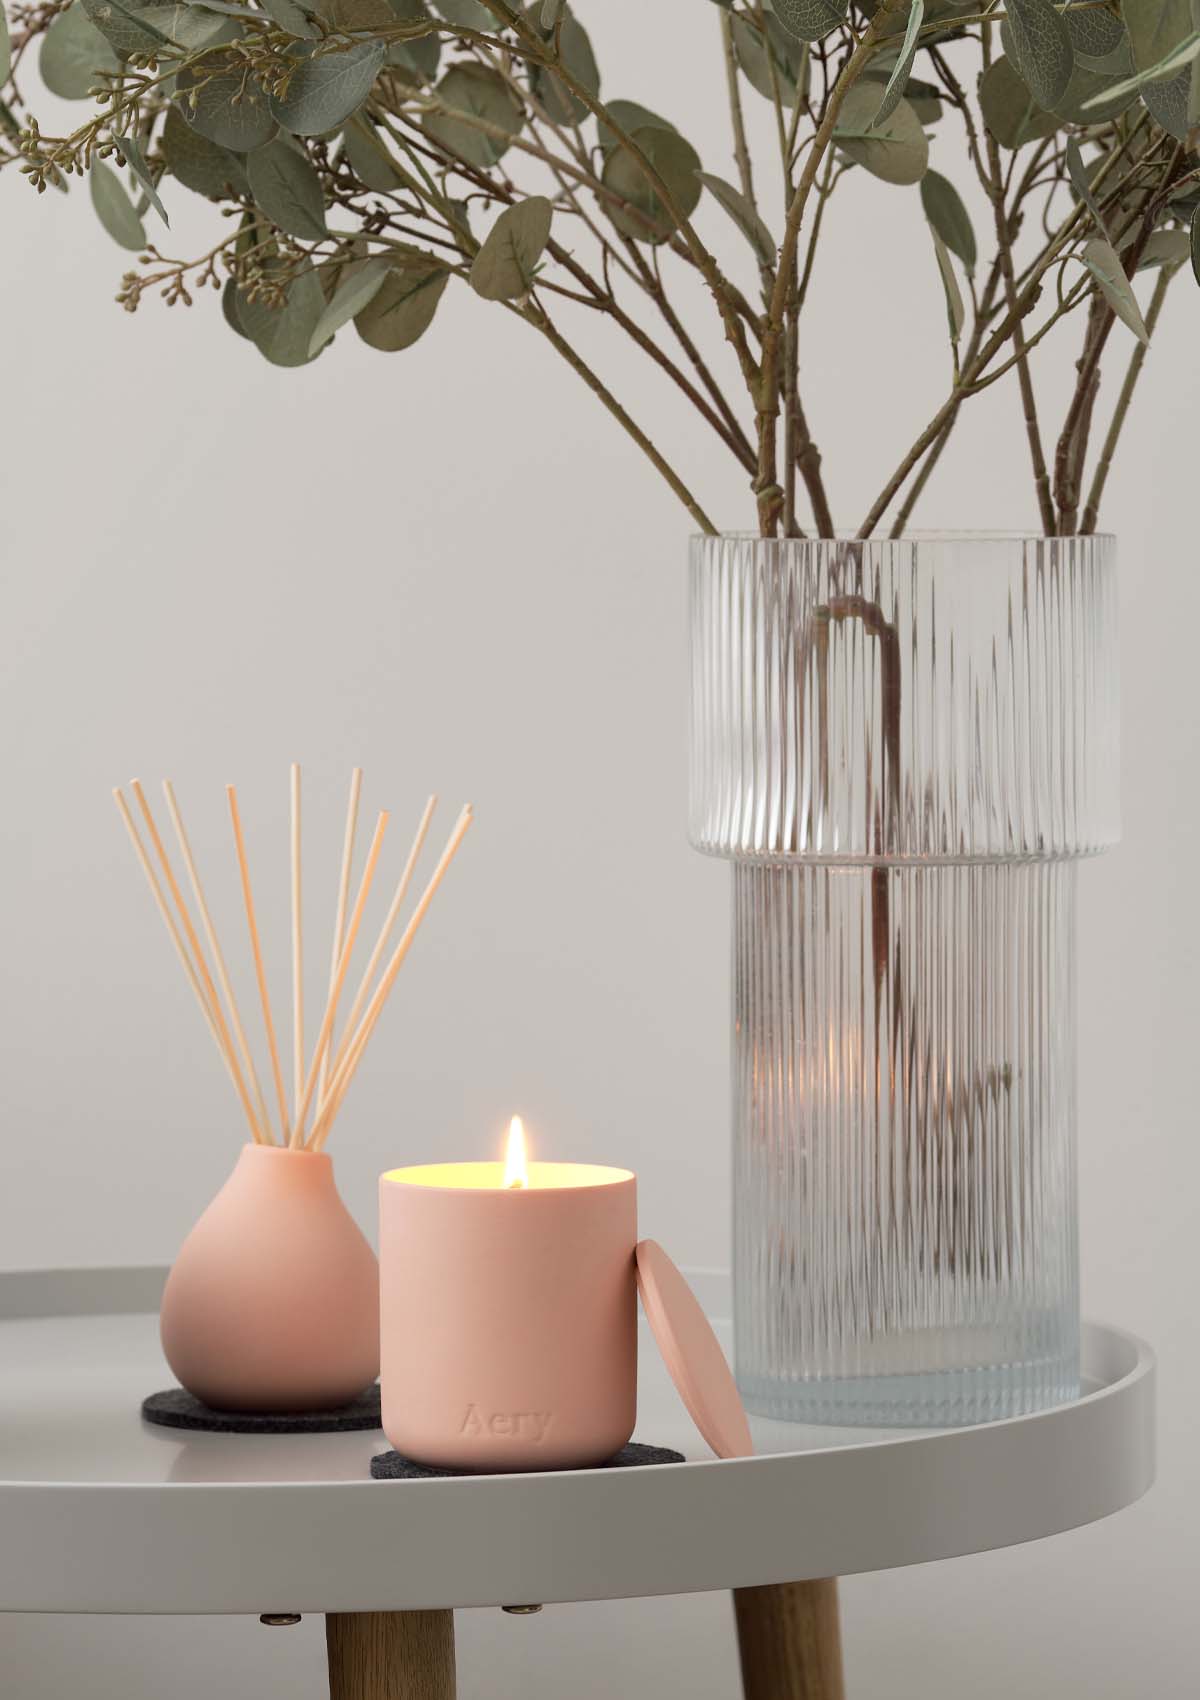 Peach Aztec Tuberose Candle and Diffuser by Aery displayed next to glass vase of greenery on grey circle table 